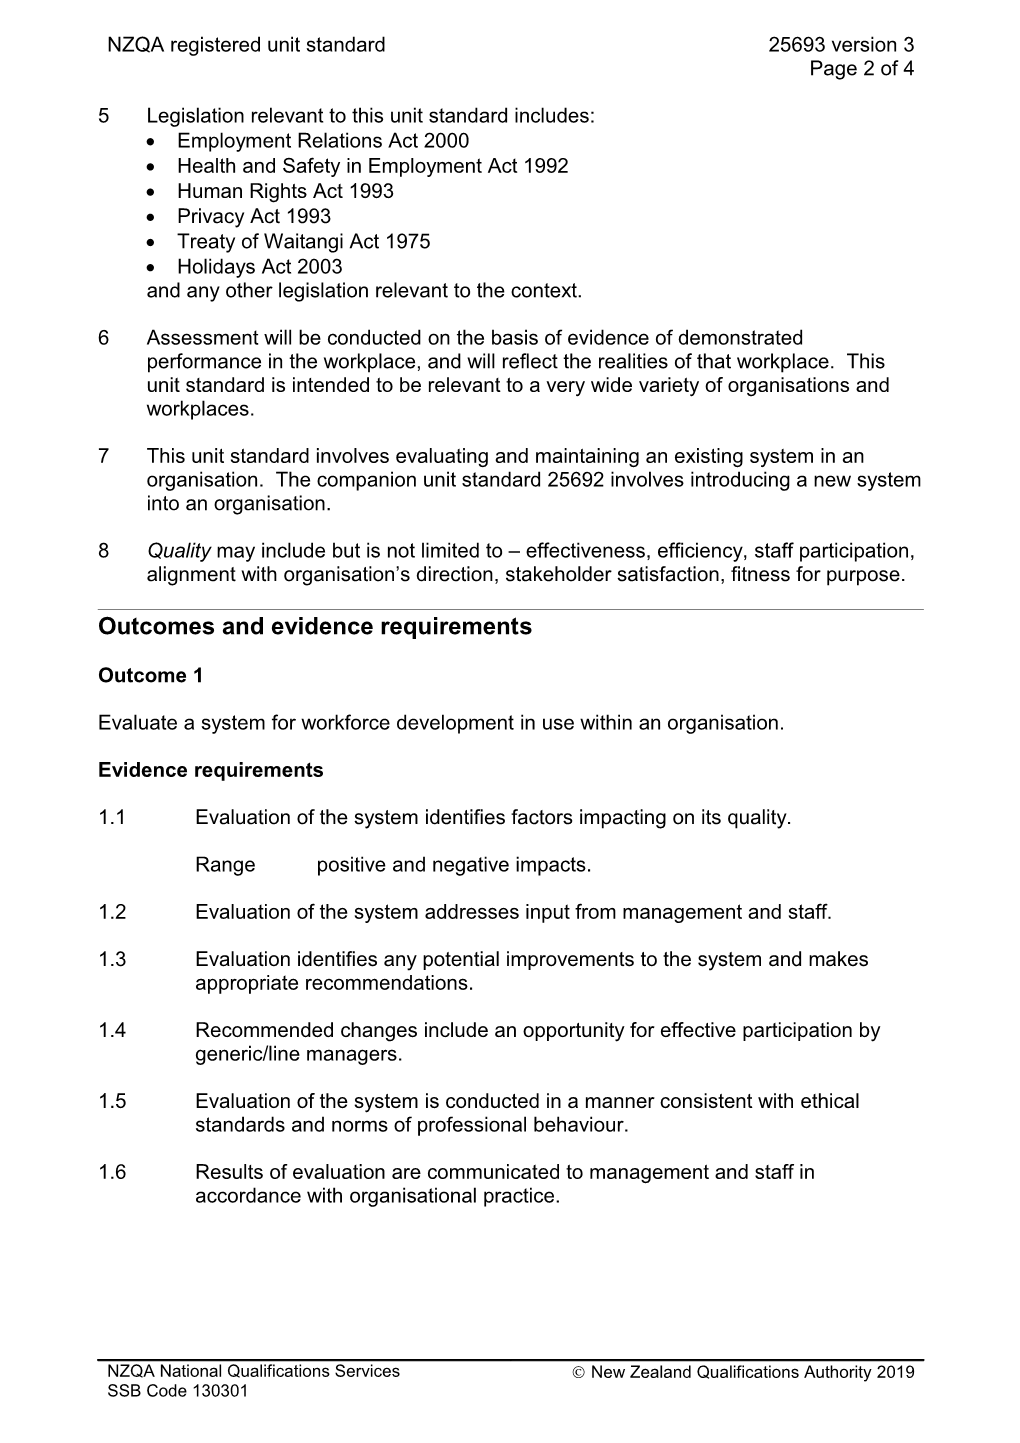 25693 Evaluate and Maintain a System for Workforce Development in an Organisation